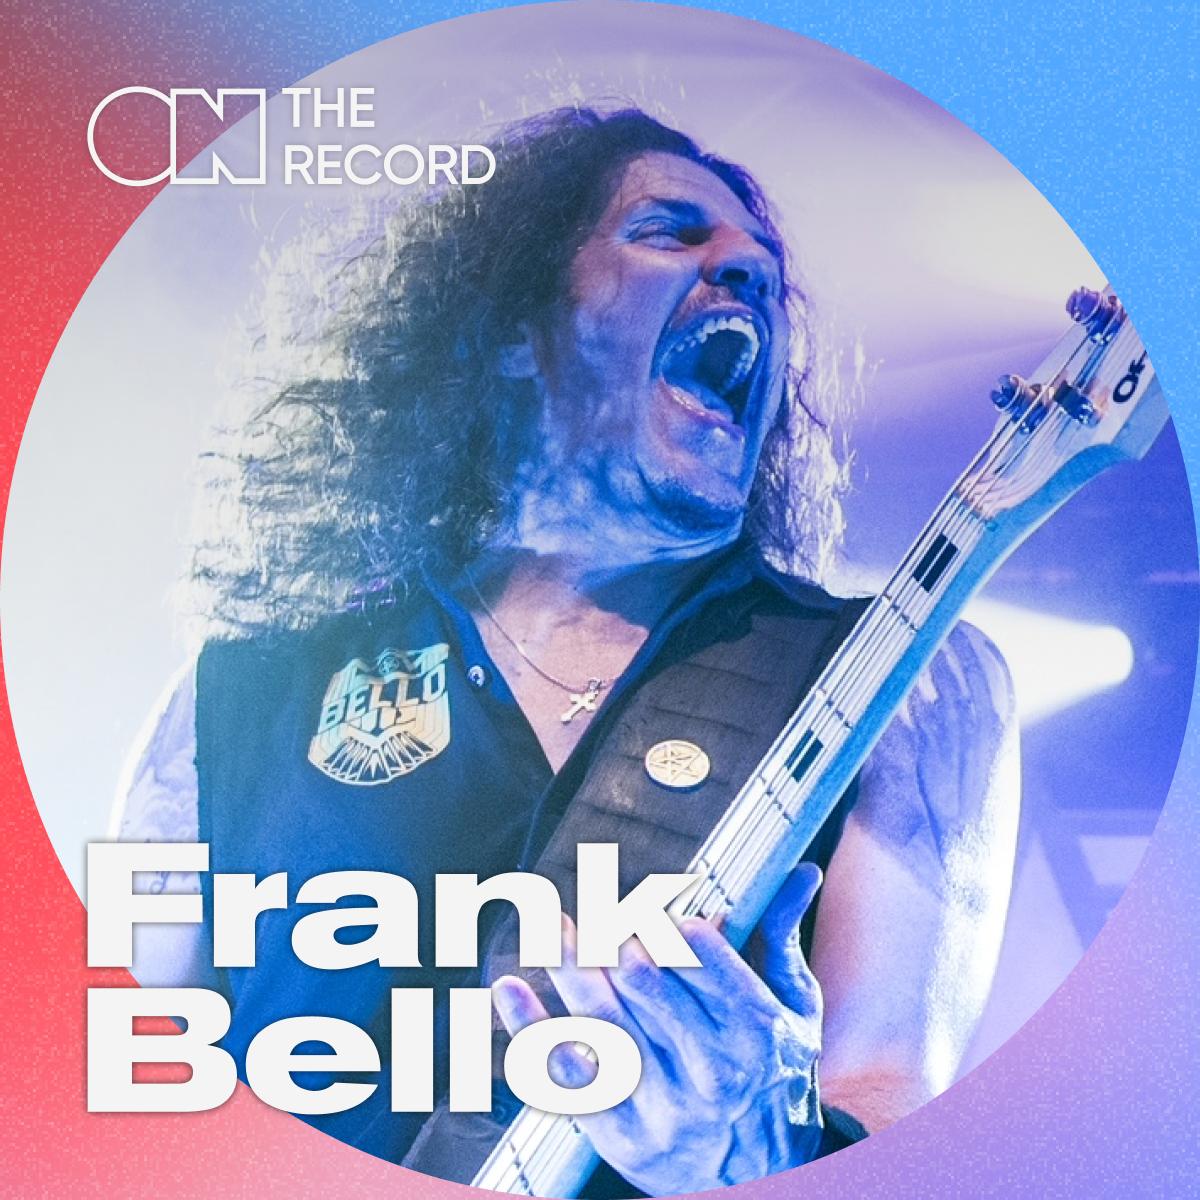 On The Record: Frank Bello on Anthrax, pranks and music therapy